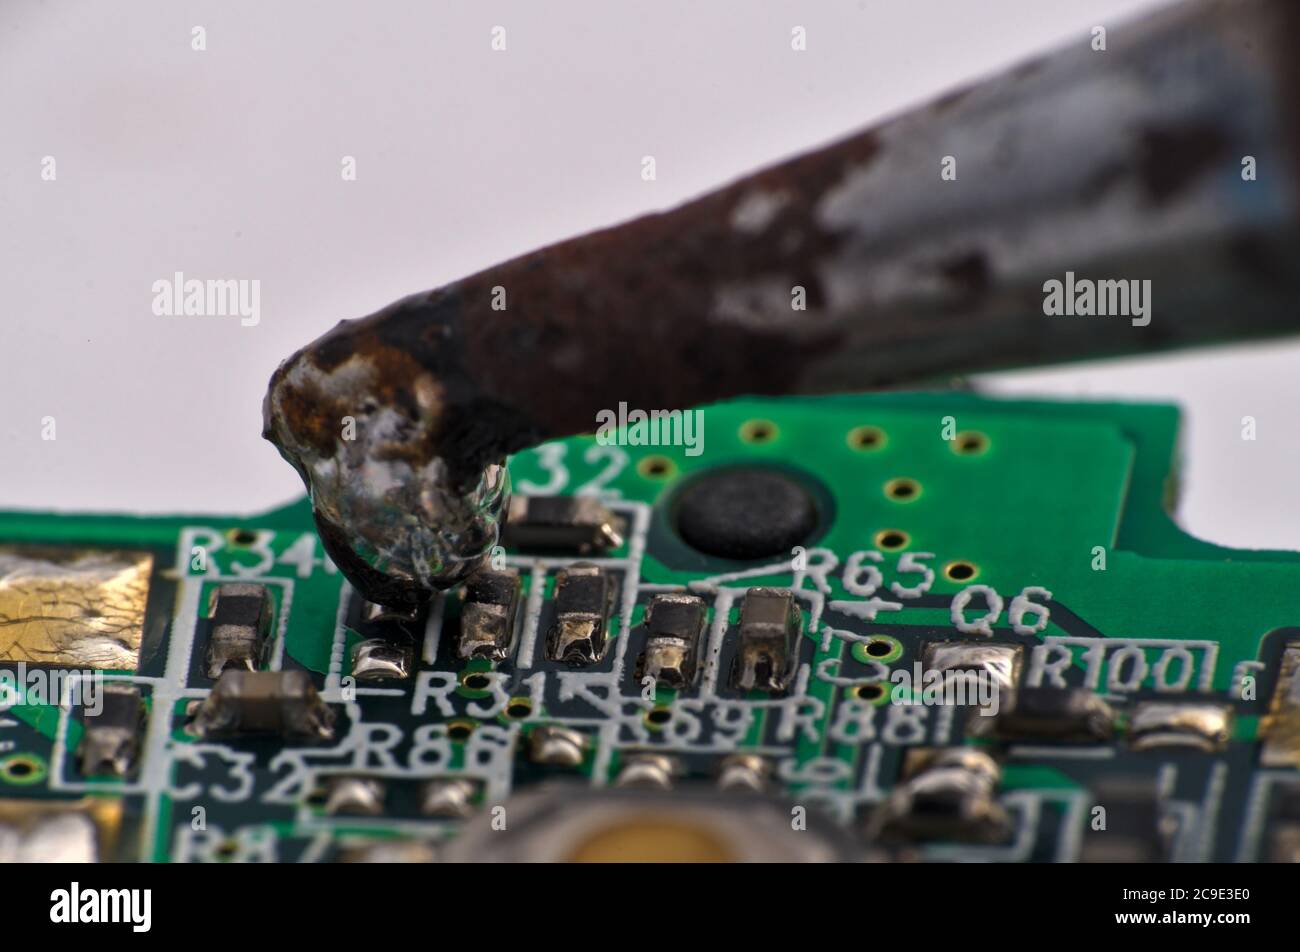 soldering iron on circuit board assembly. Electronic components Stock Photo